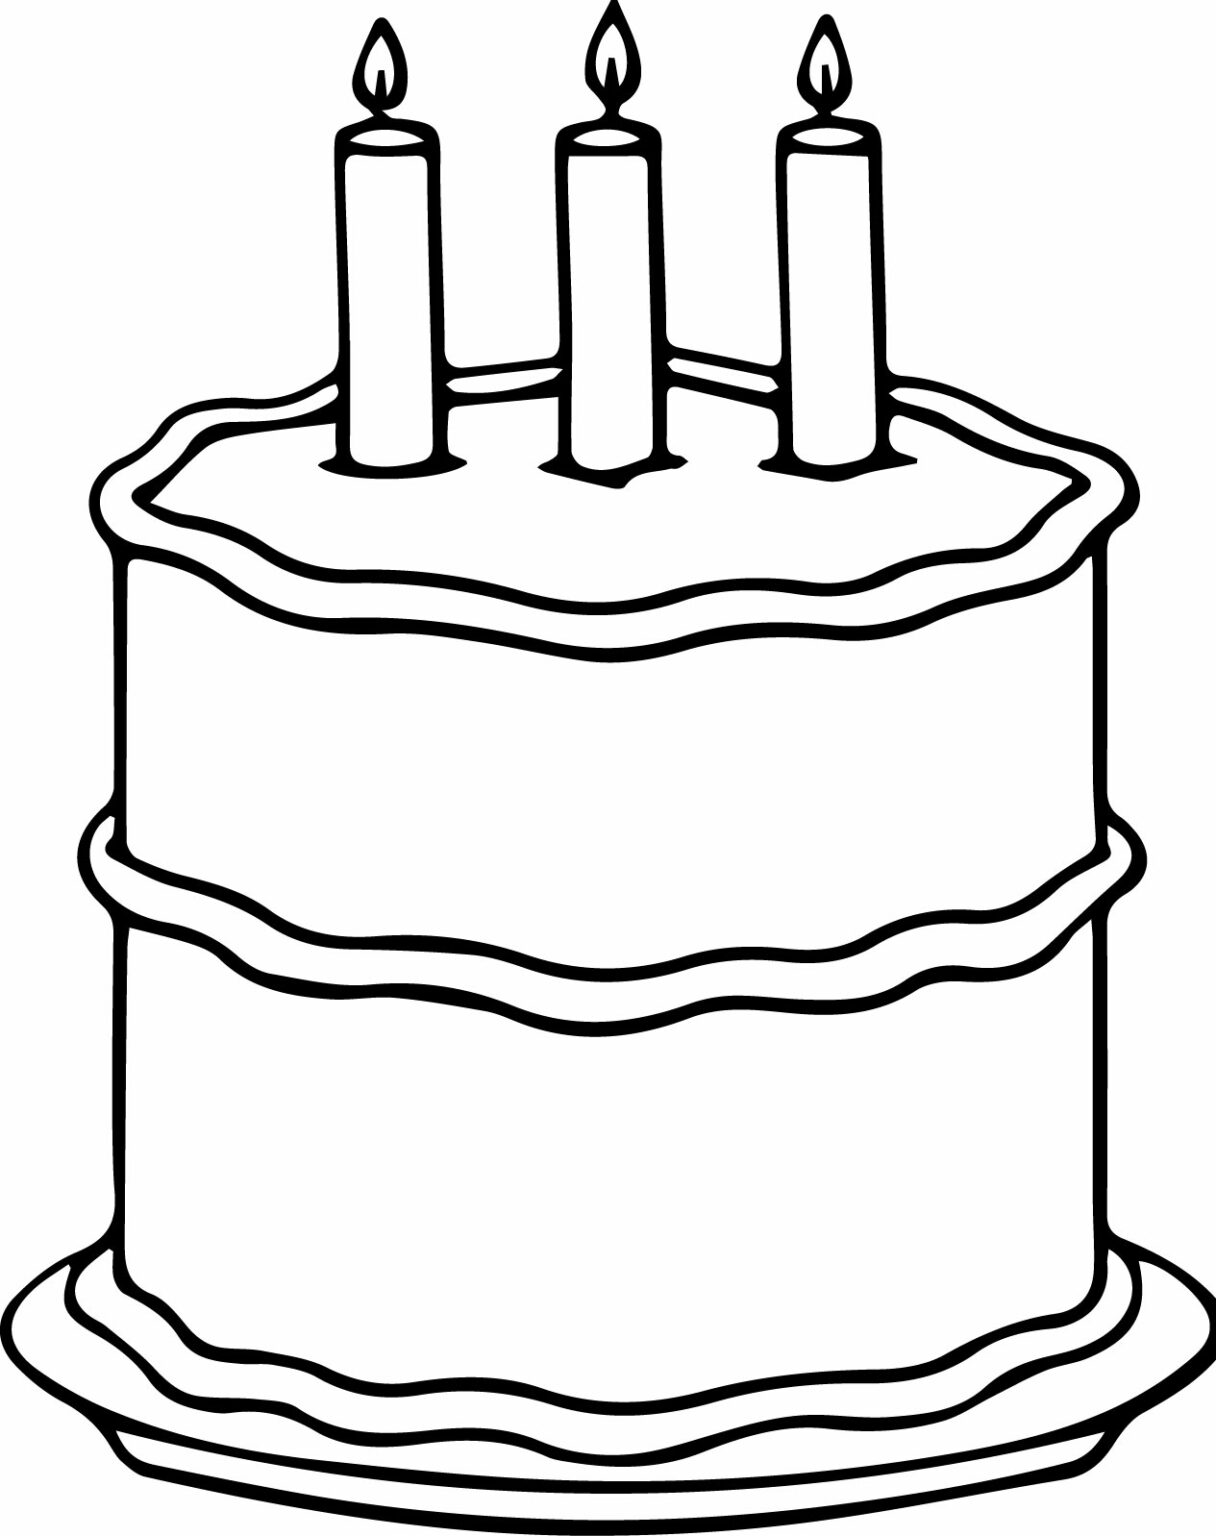 Delicious Cake Coloring Pages Pdf Free - Coloringfolder.com